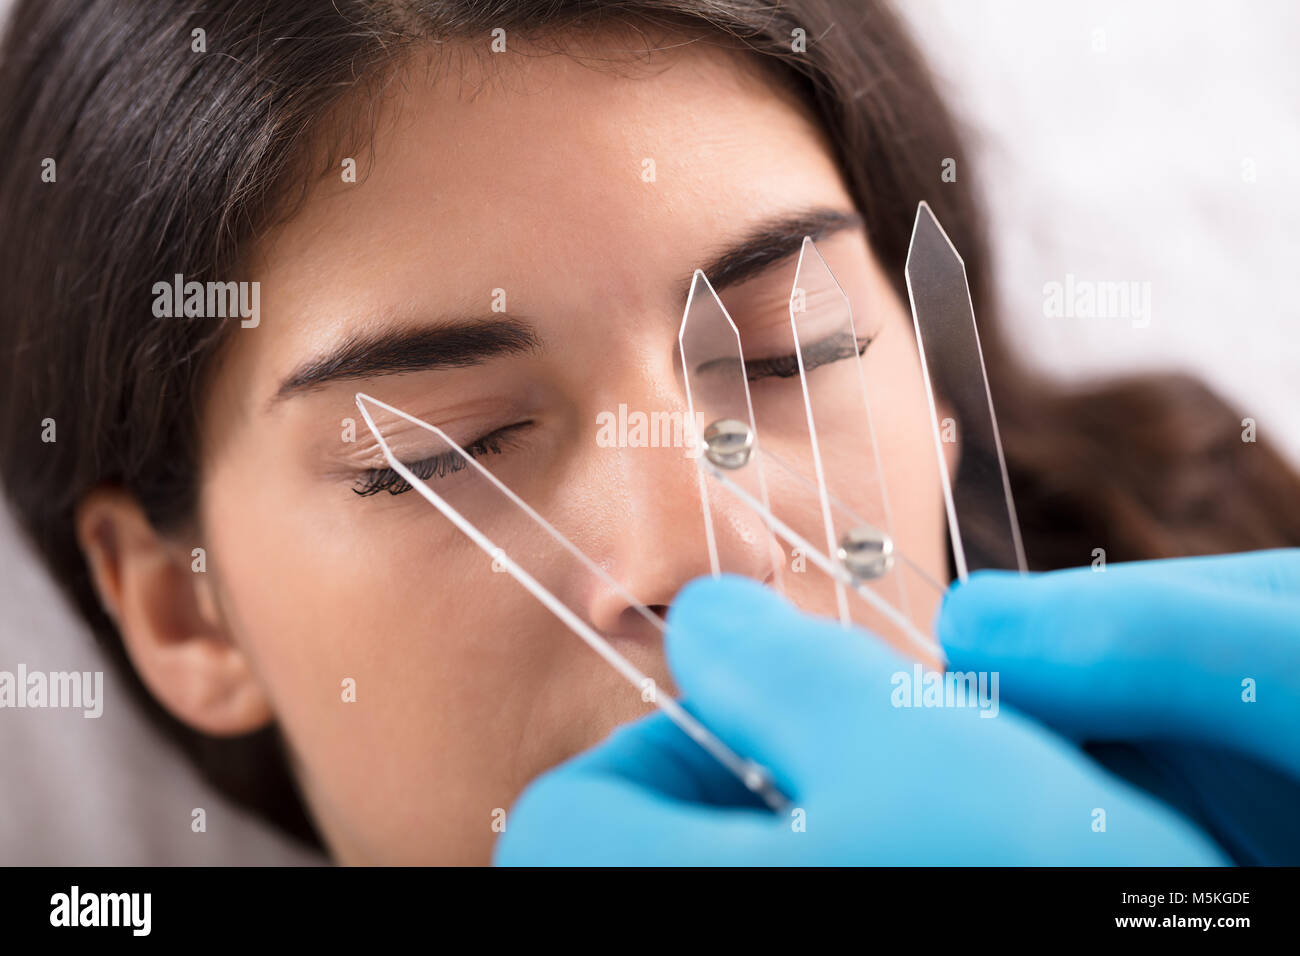 Cosmetologist Measuring Symmetry Of A Woman's Eyebrows With A Special Tool Stock Photo